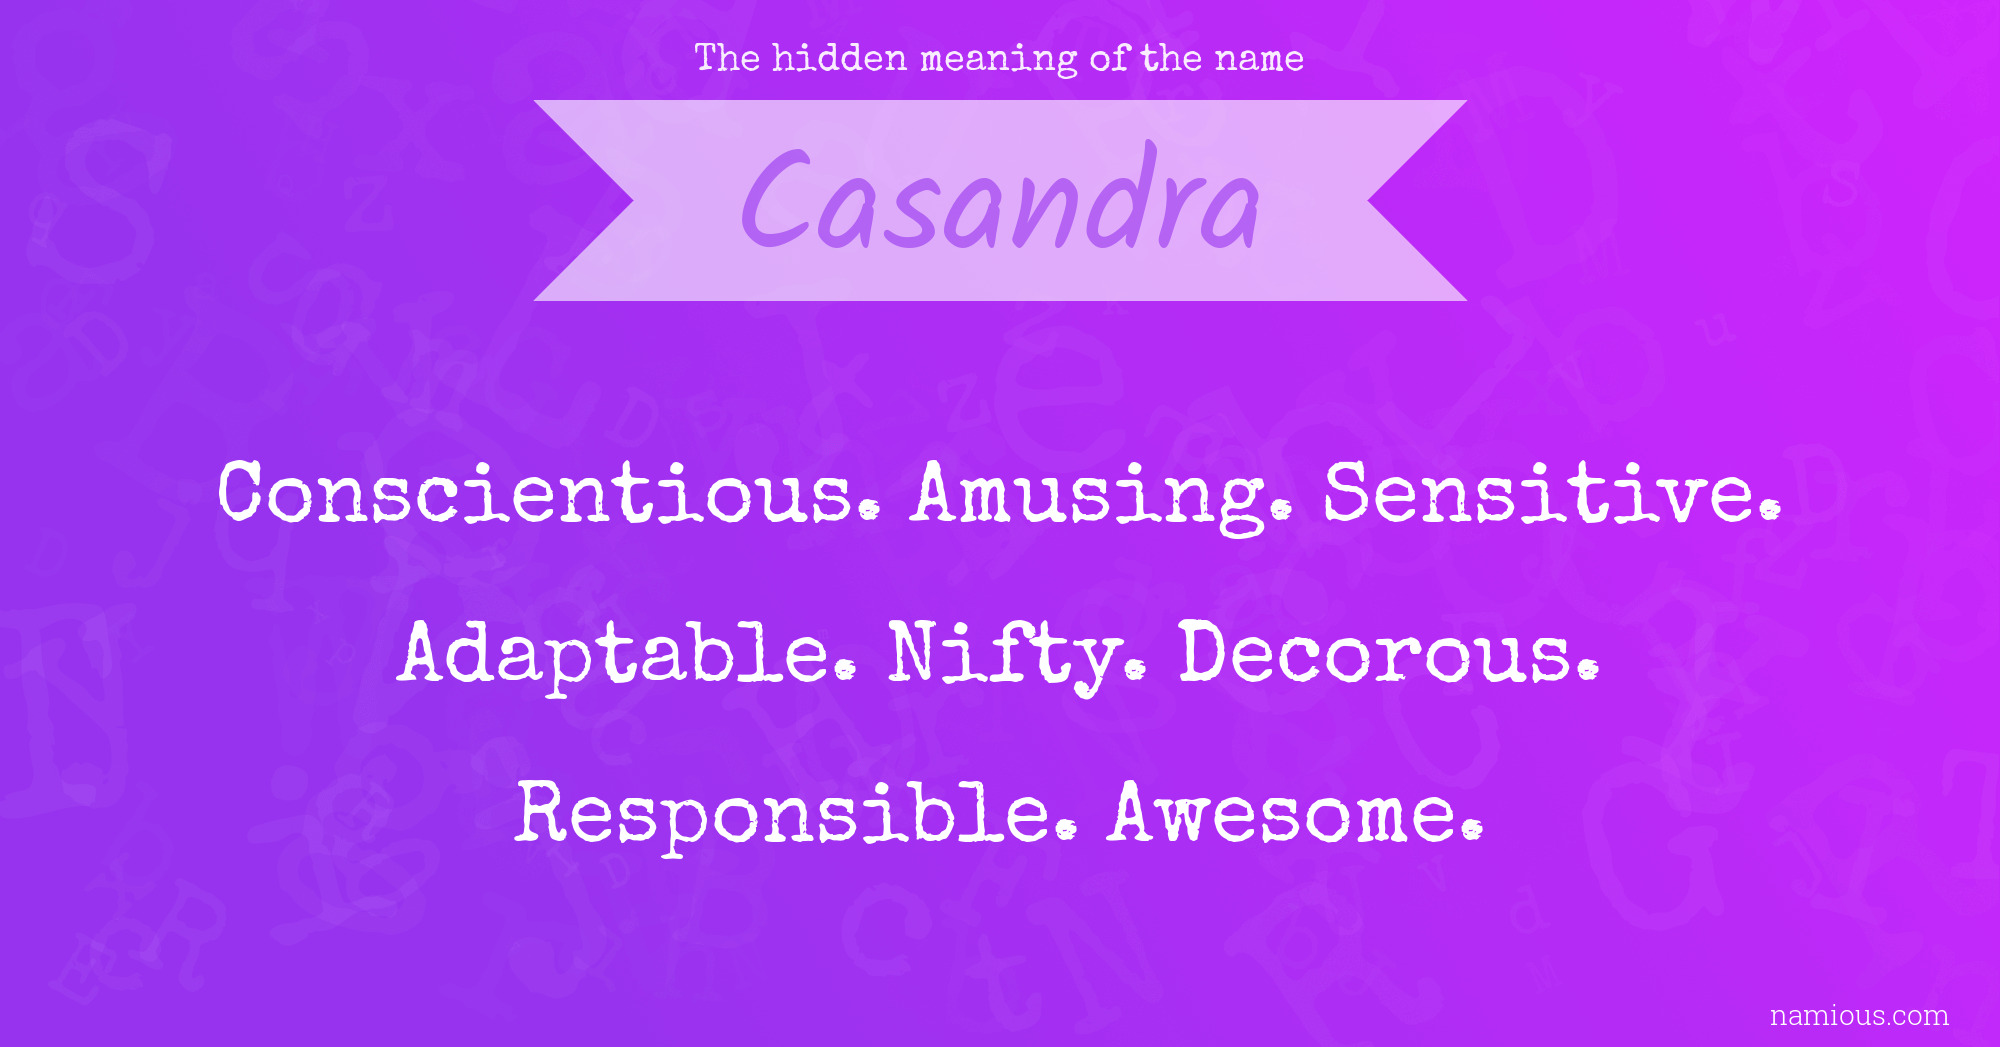 The hidden meaning of the name Casandra